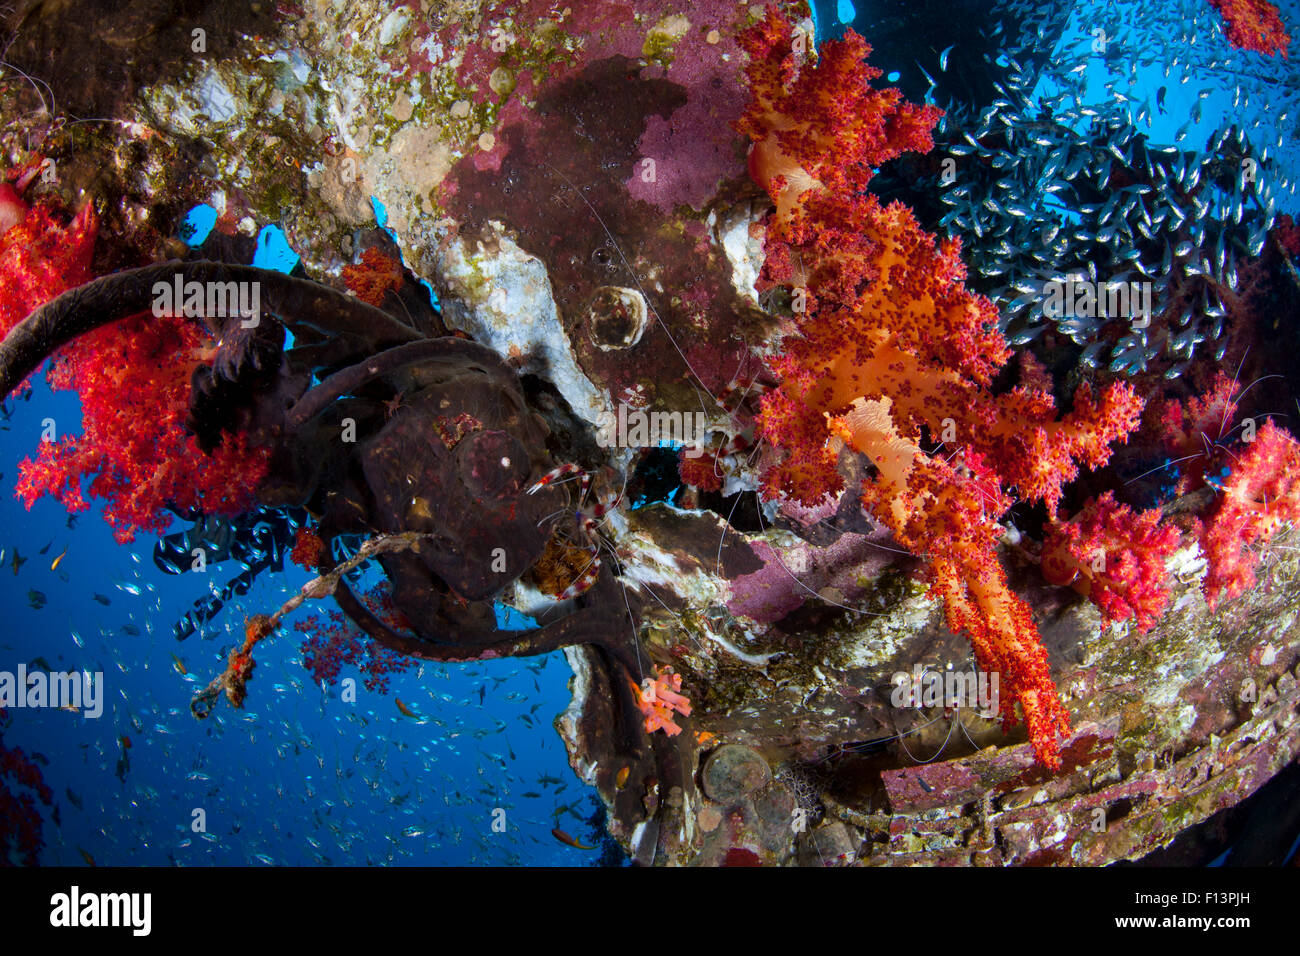 Soft coral, Glassfish and Cleaner Shrimp on a Wreck's Mast Stock Photo